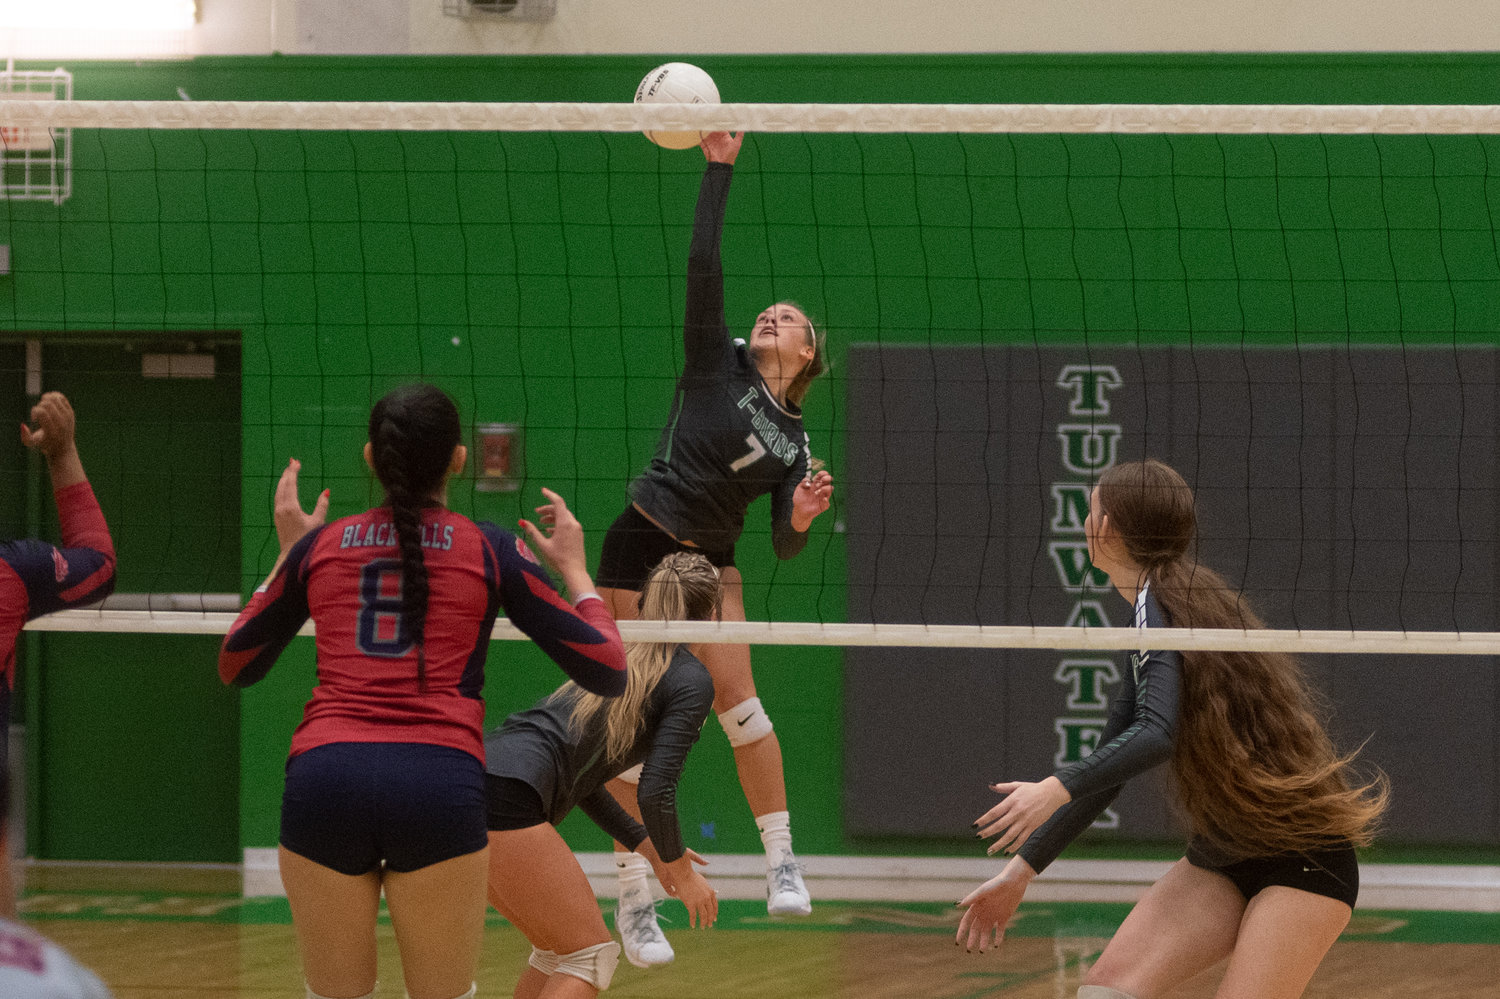 Tumwater sophomore Brooklyn Hayes hits a ball over the net against Black Hills Oct. 12.